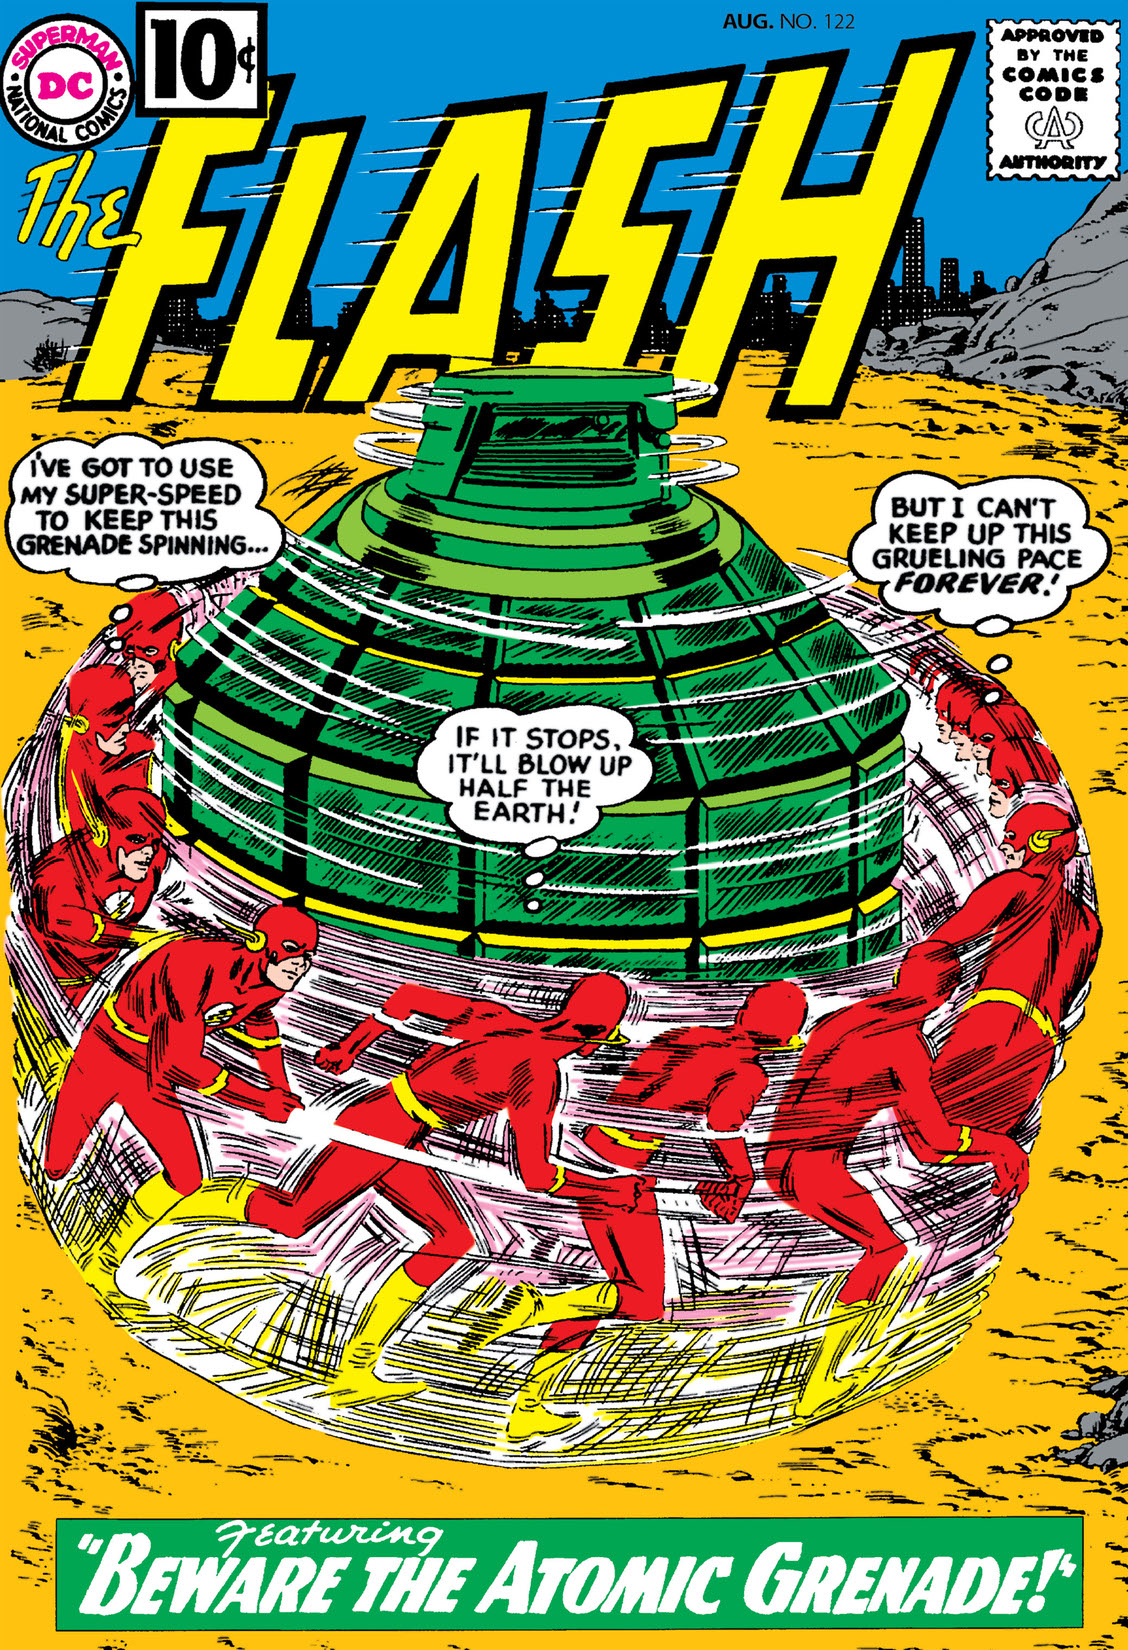 The Flash (1959-) #122 preview images